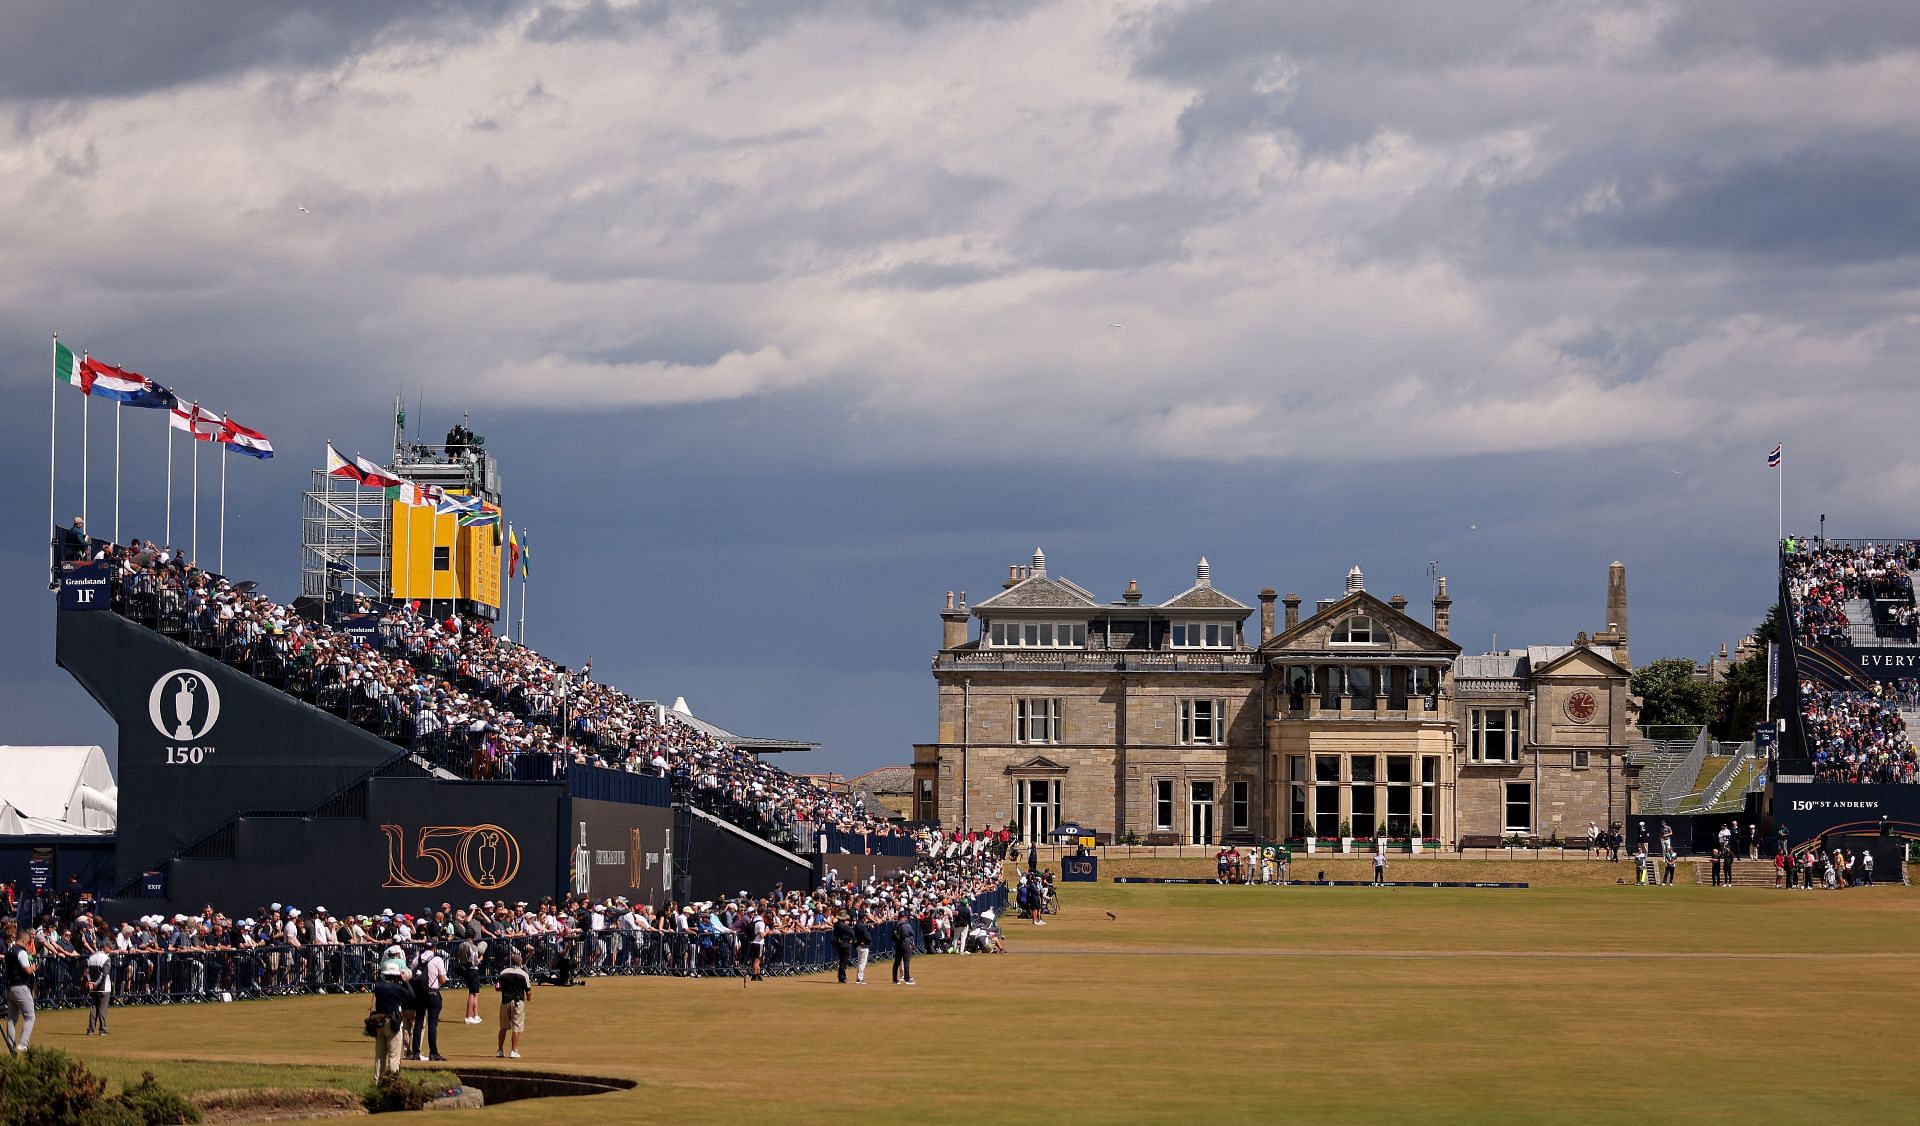 Founded in 1860, The Open is one of the most prestigious sporting events in the world.